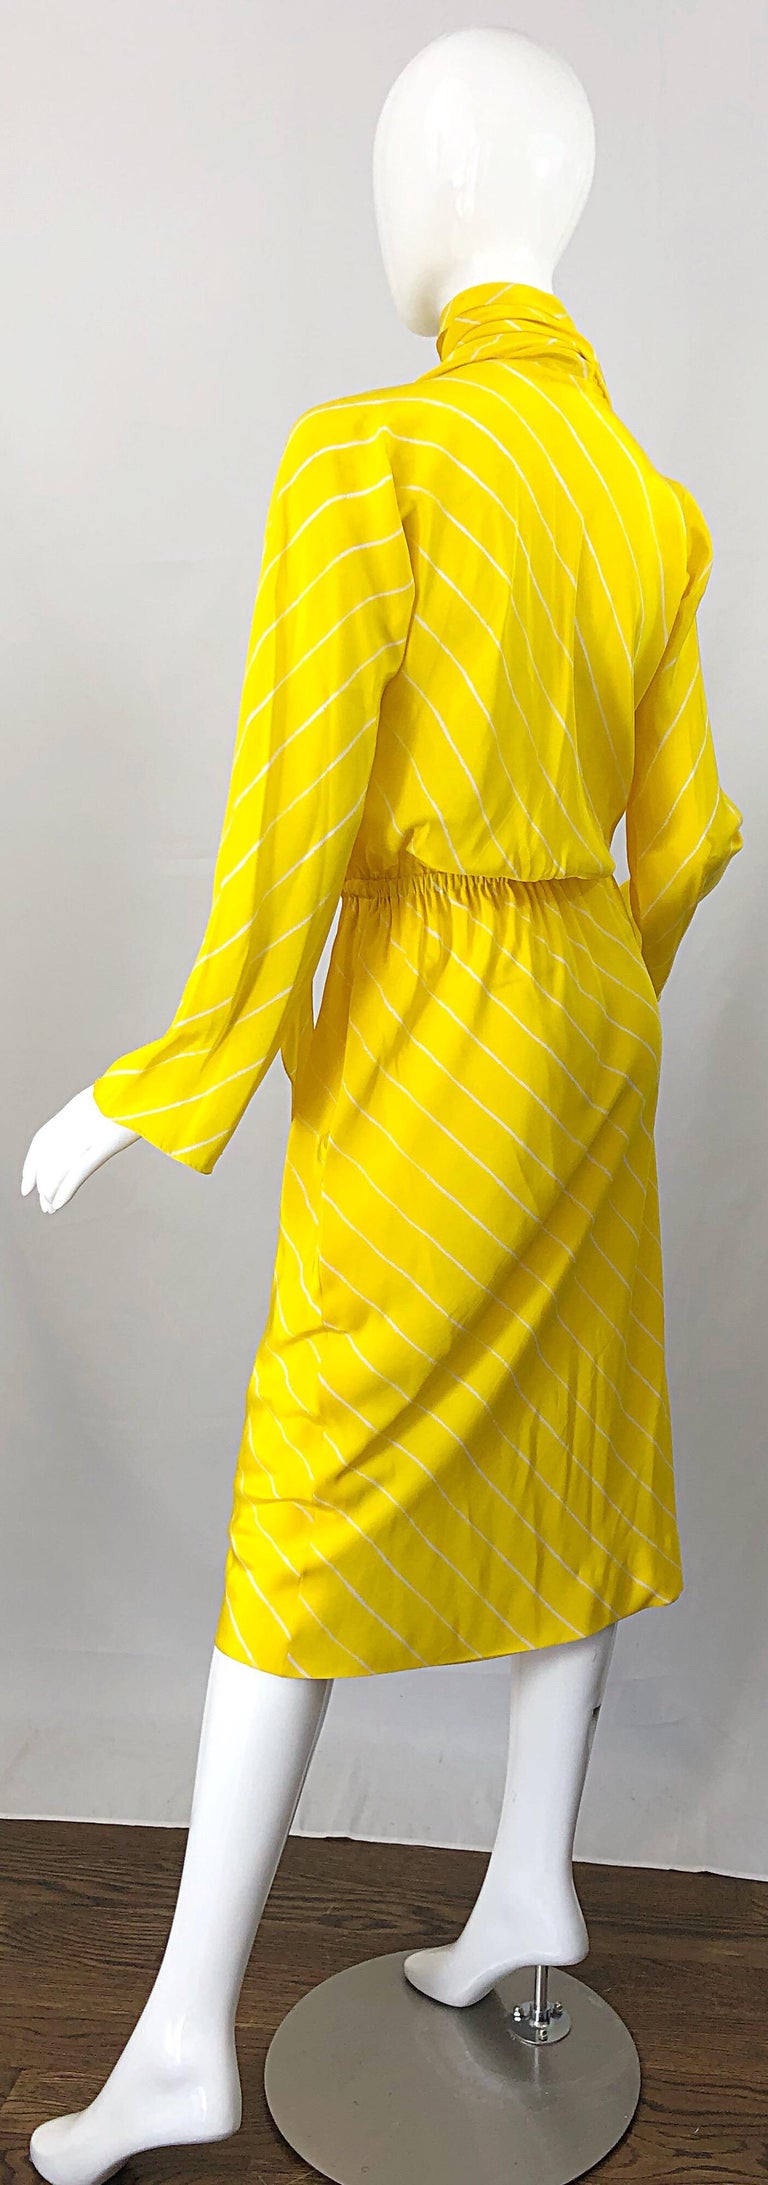 1970s Halston Canary Yellow + White Chevron Striped Bell Sleeve 70s Scarf Dress For Sale 9